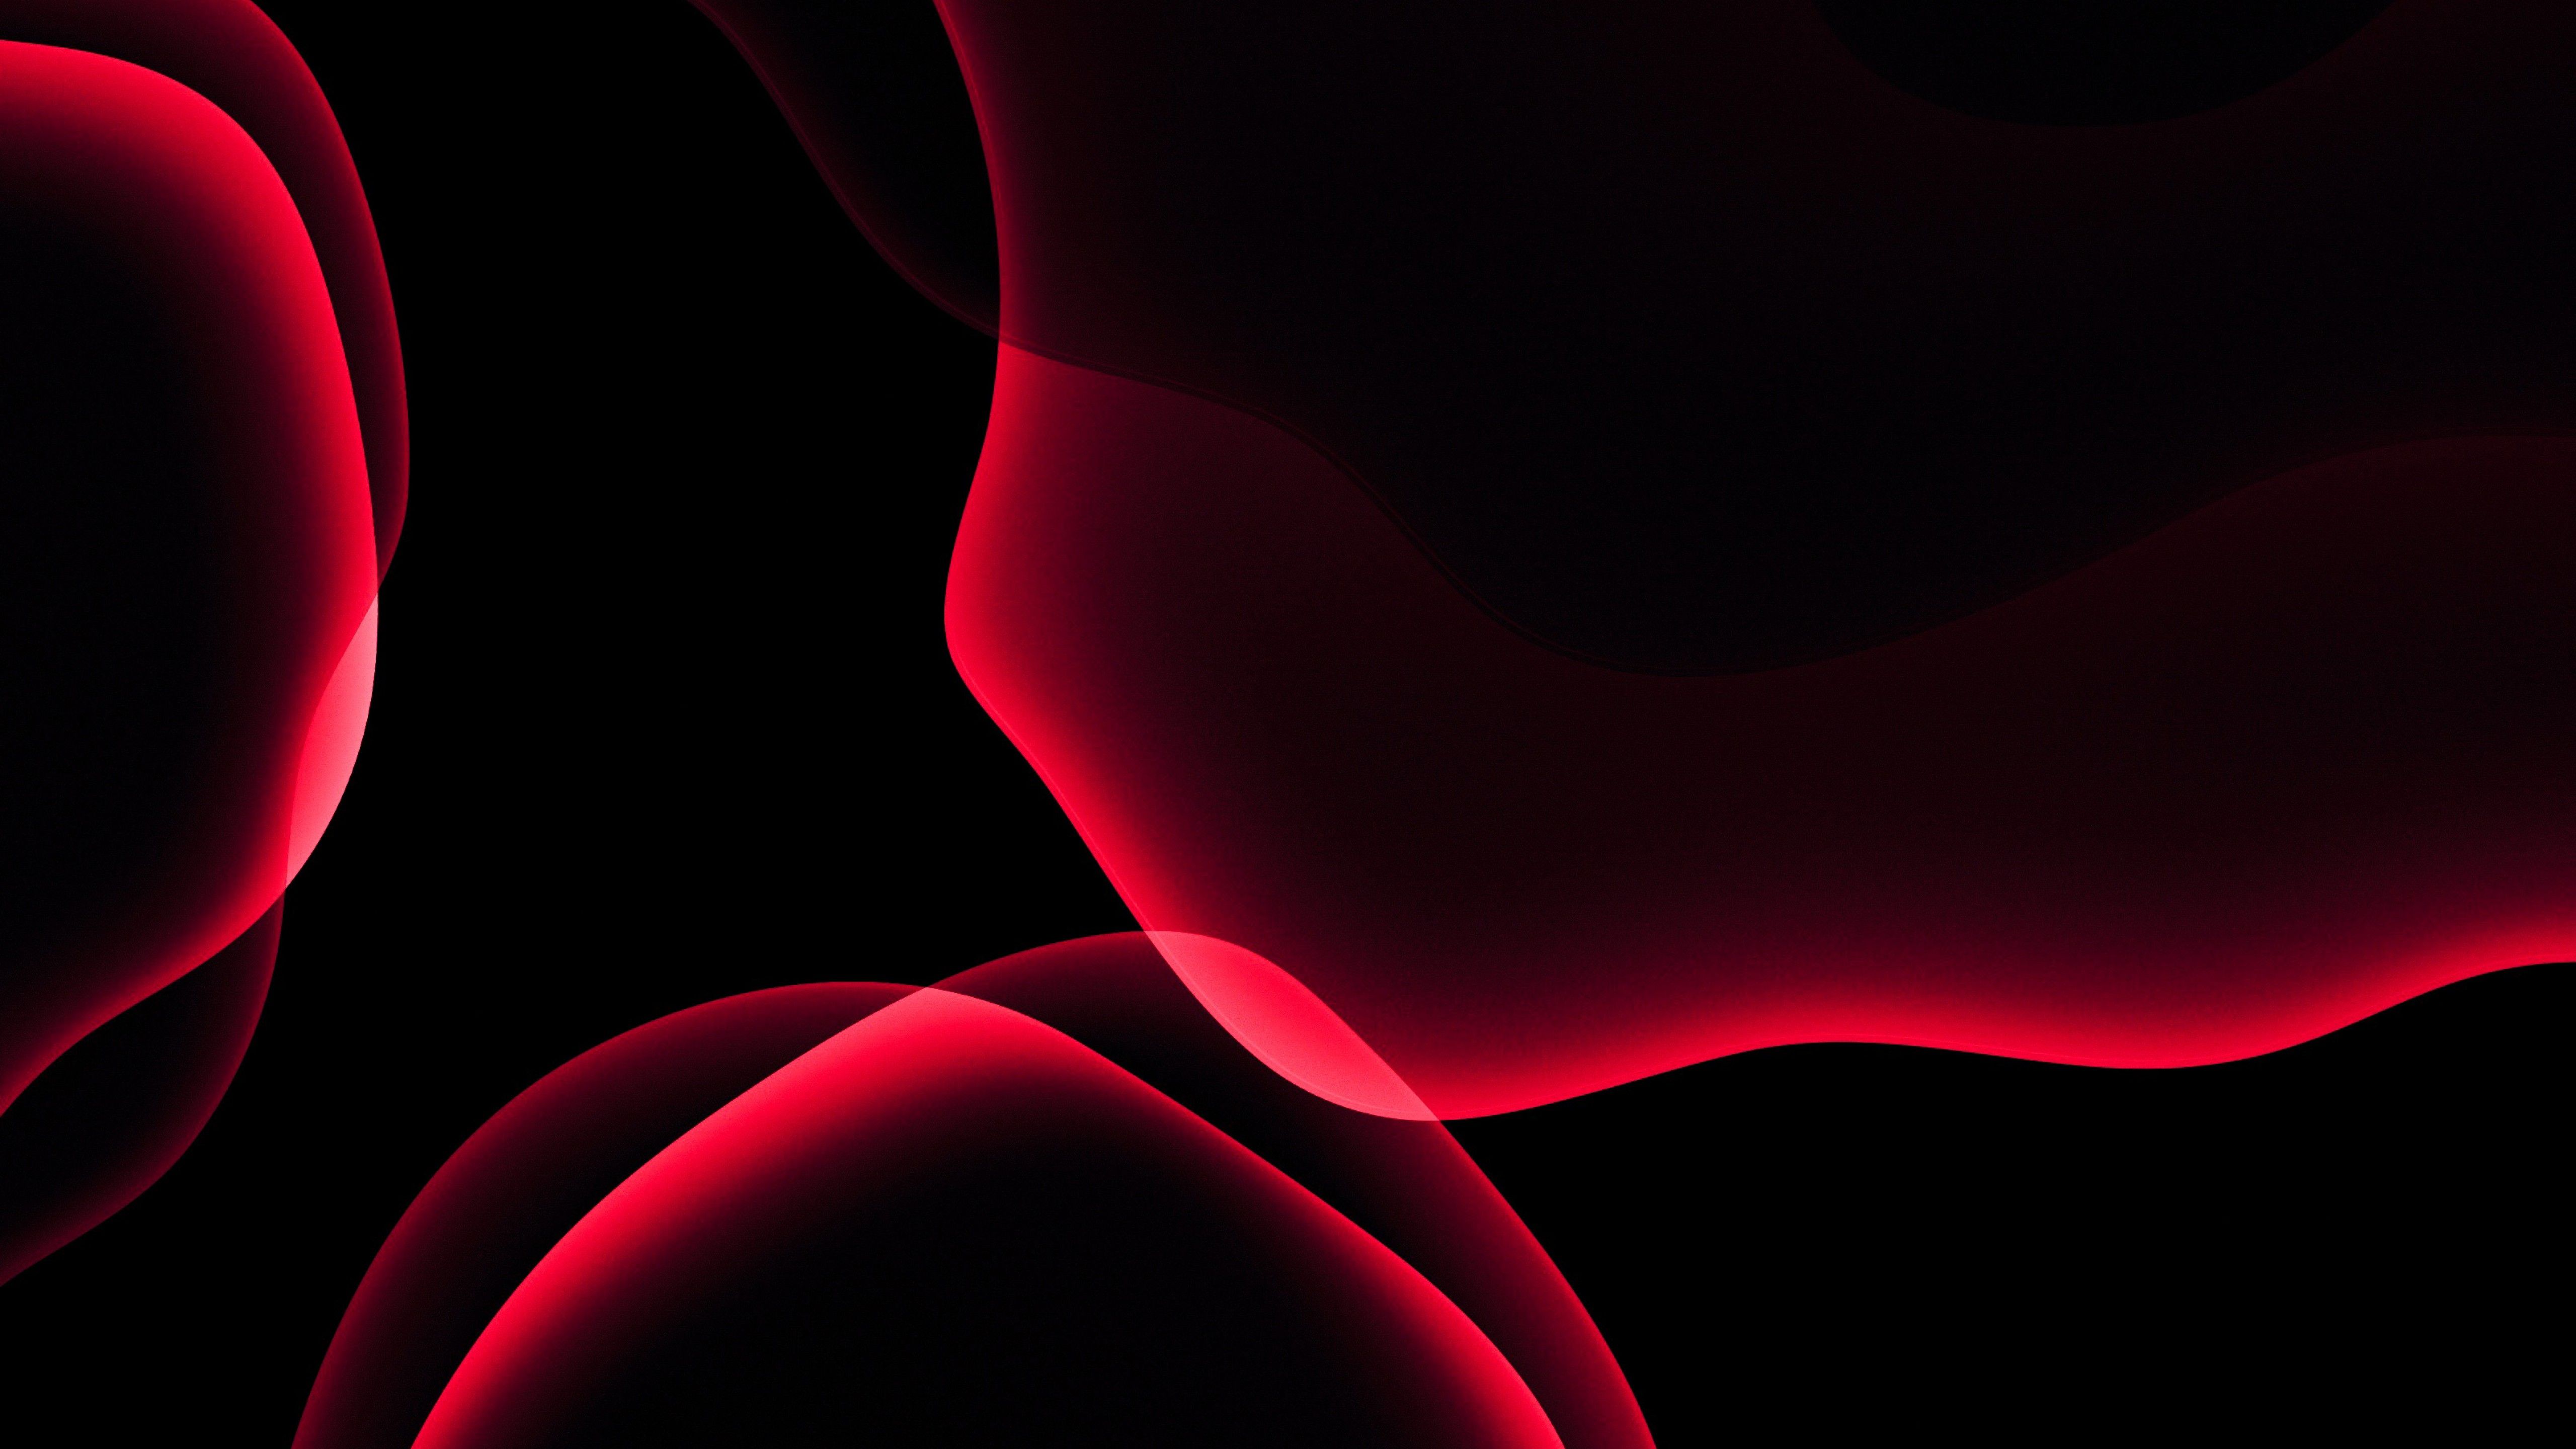 iOS 13 Wallpaper 4K, Stock, iPadOS, Red, Black background, AMOLED, HD, Abstract